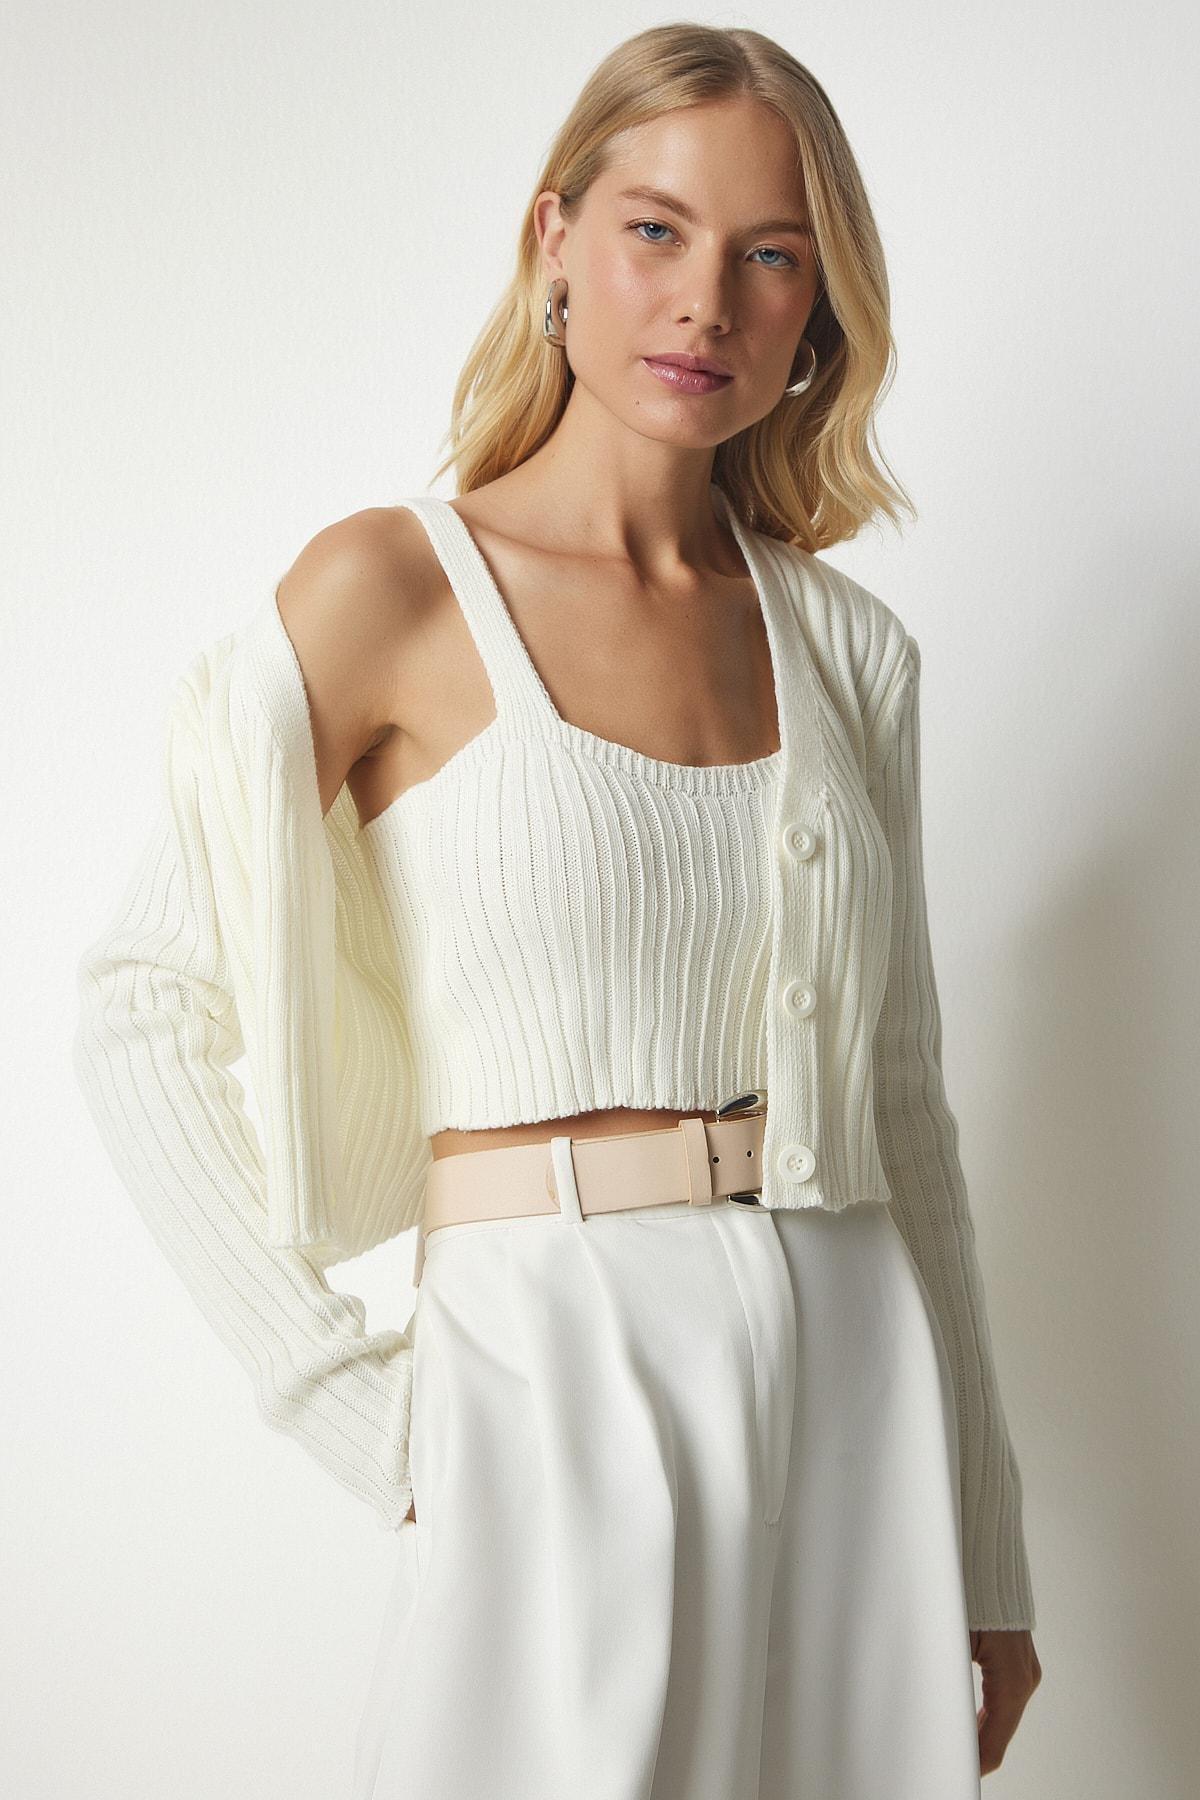 Happiness Istanbul - White Knit Sweater Bustier Cardigan Co-Ord Set